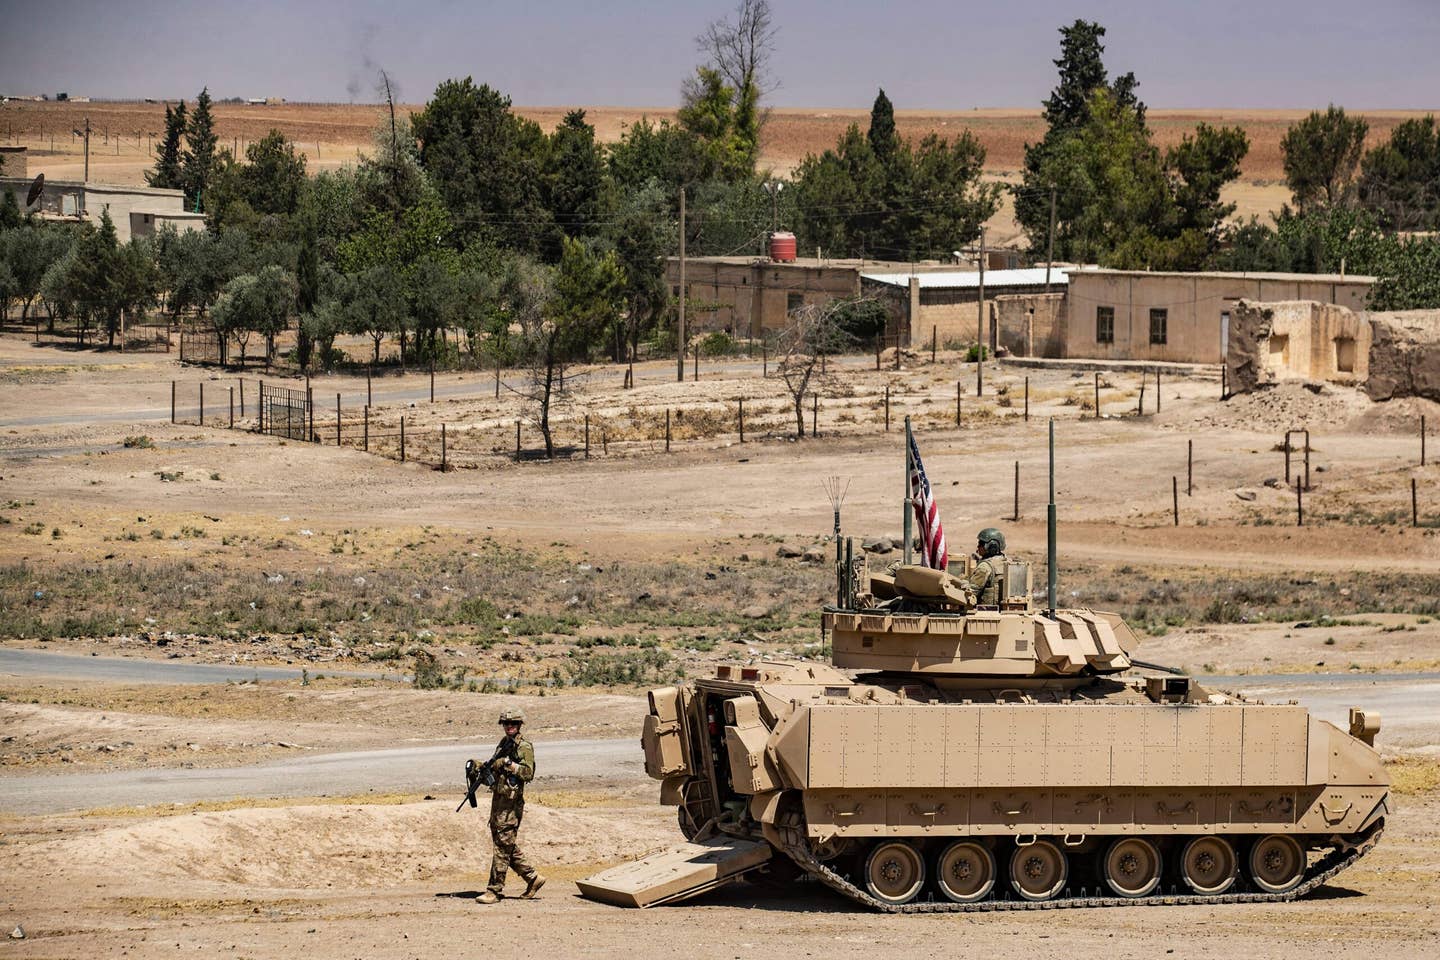 A US soldier walks out of a Bradley Fighting Vehicle (BFV) equipped with BRAT tiles during a patrol near the Rumaylan (Rmeilan) oil wells northeast Syria on June 22, 2021. (Delil SOULEIMAN / AFP)